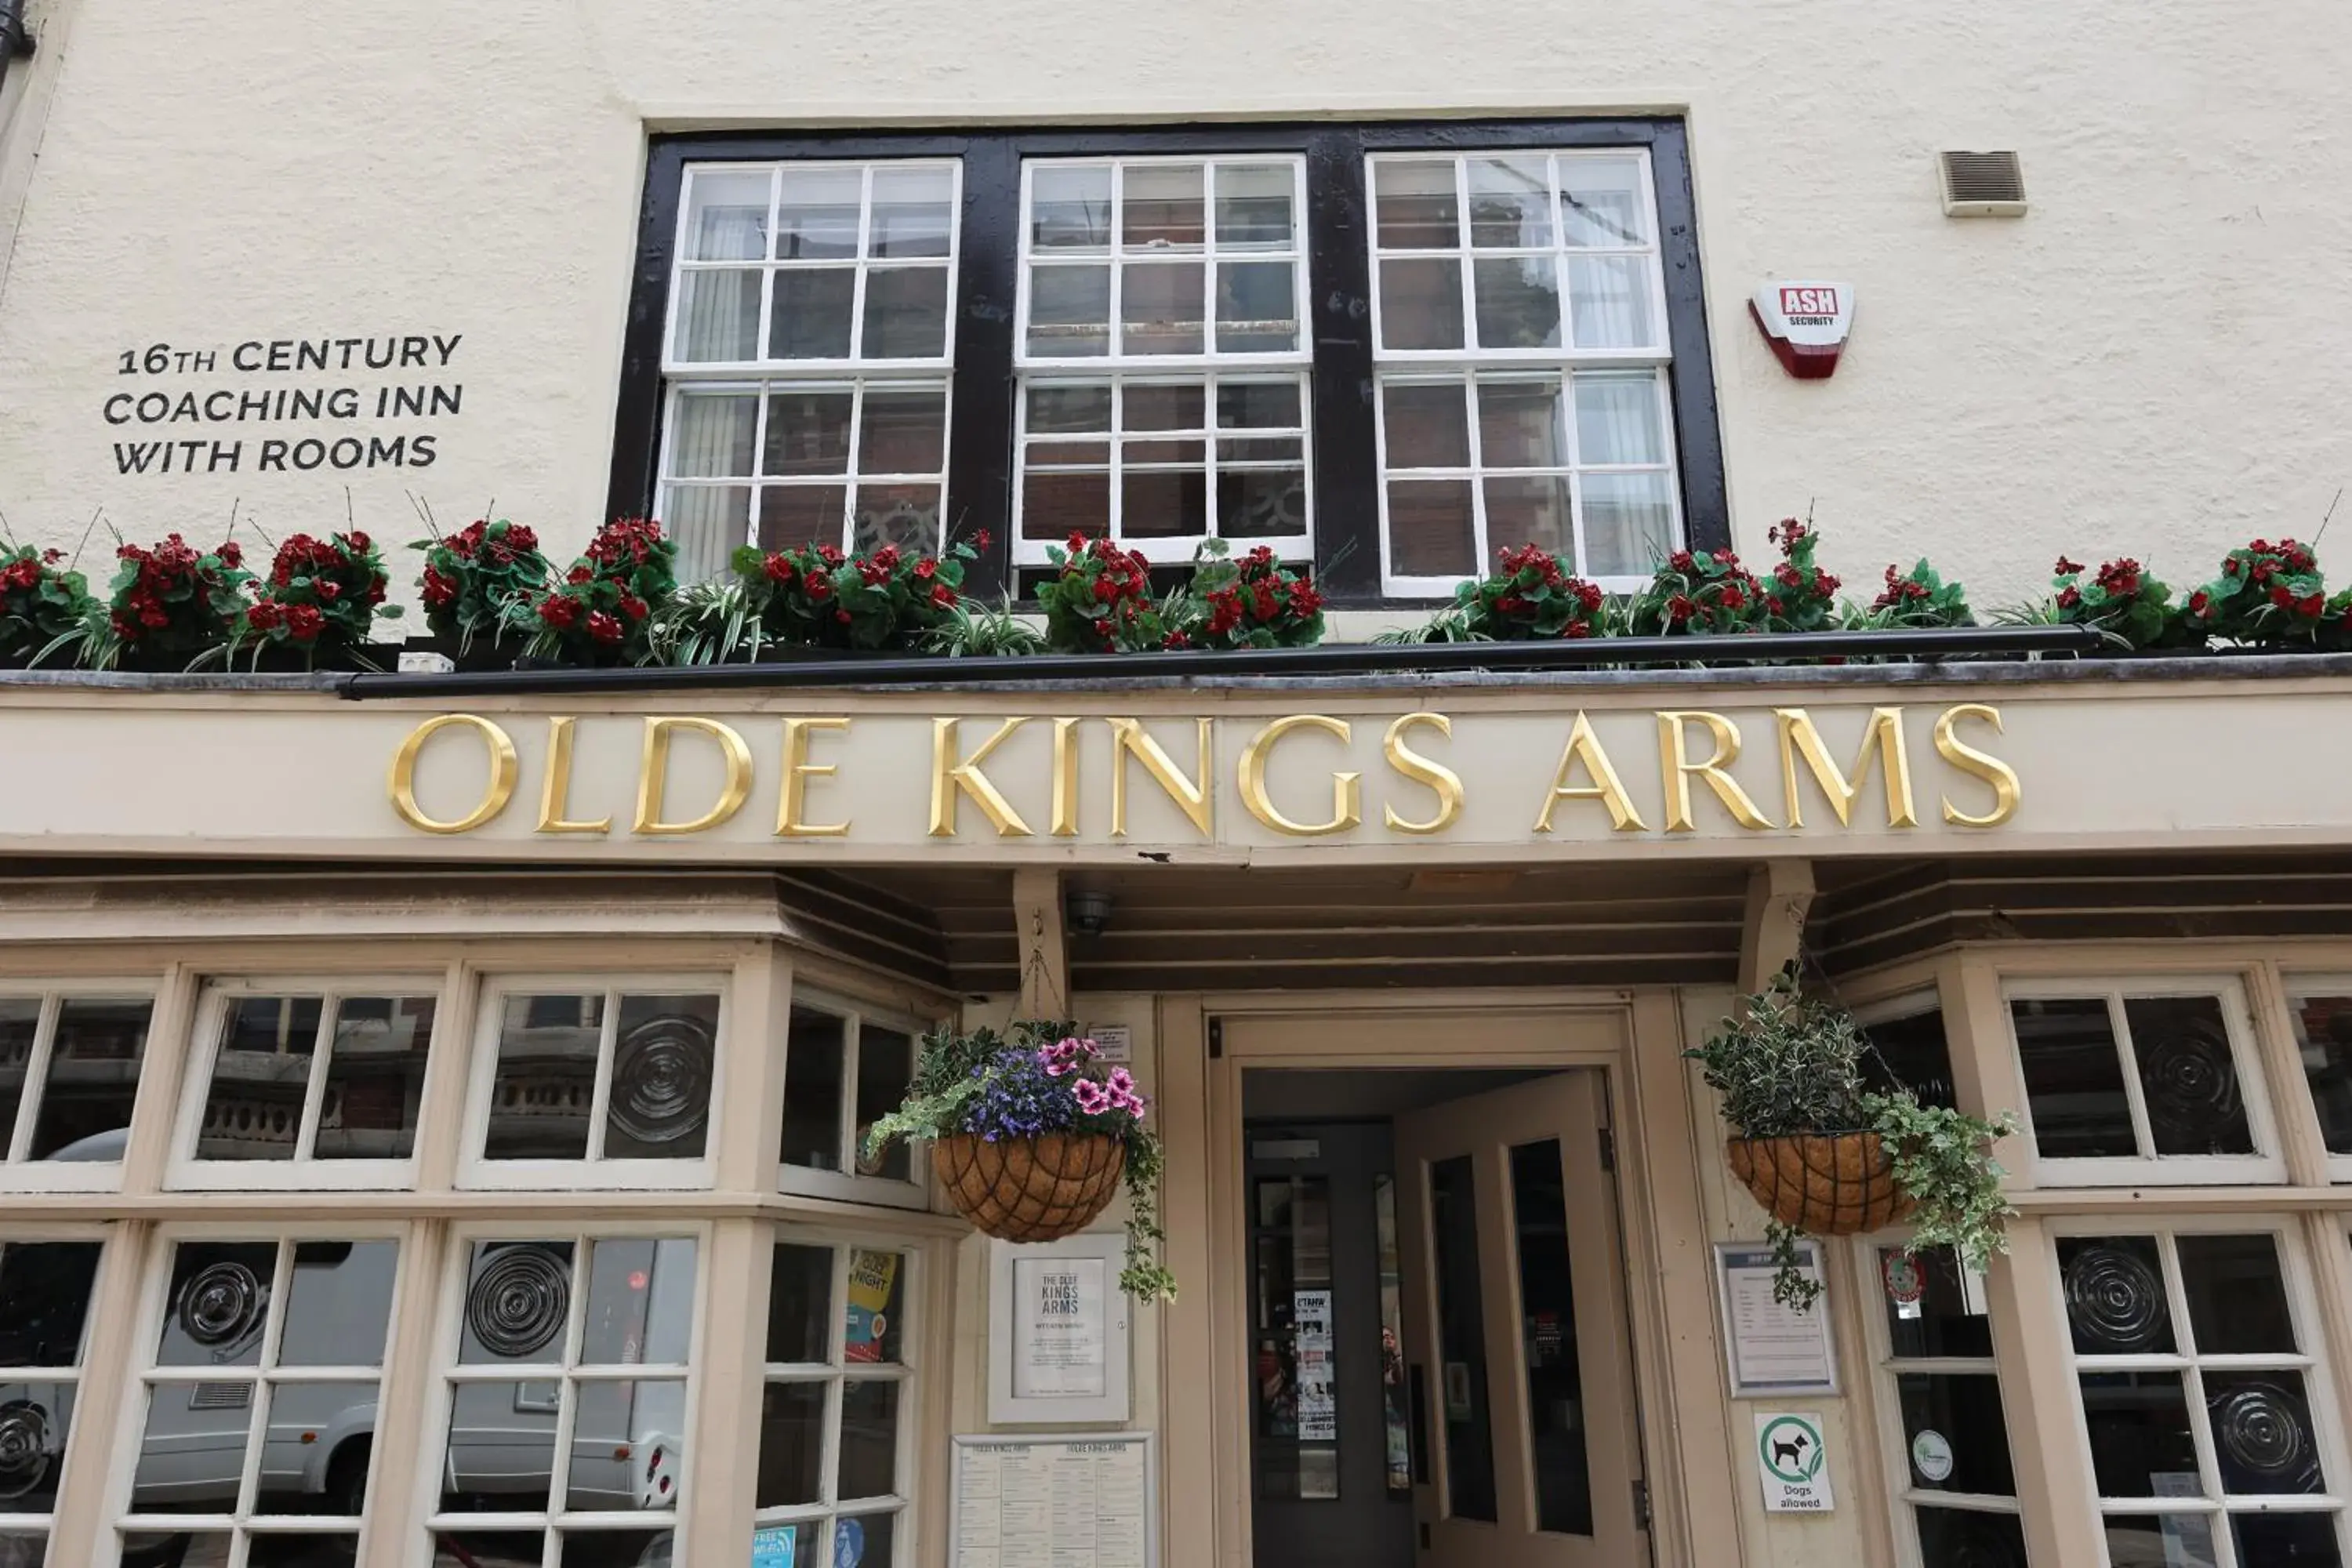 Property Building in The Olde Kings Arms